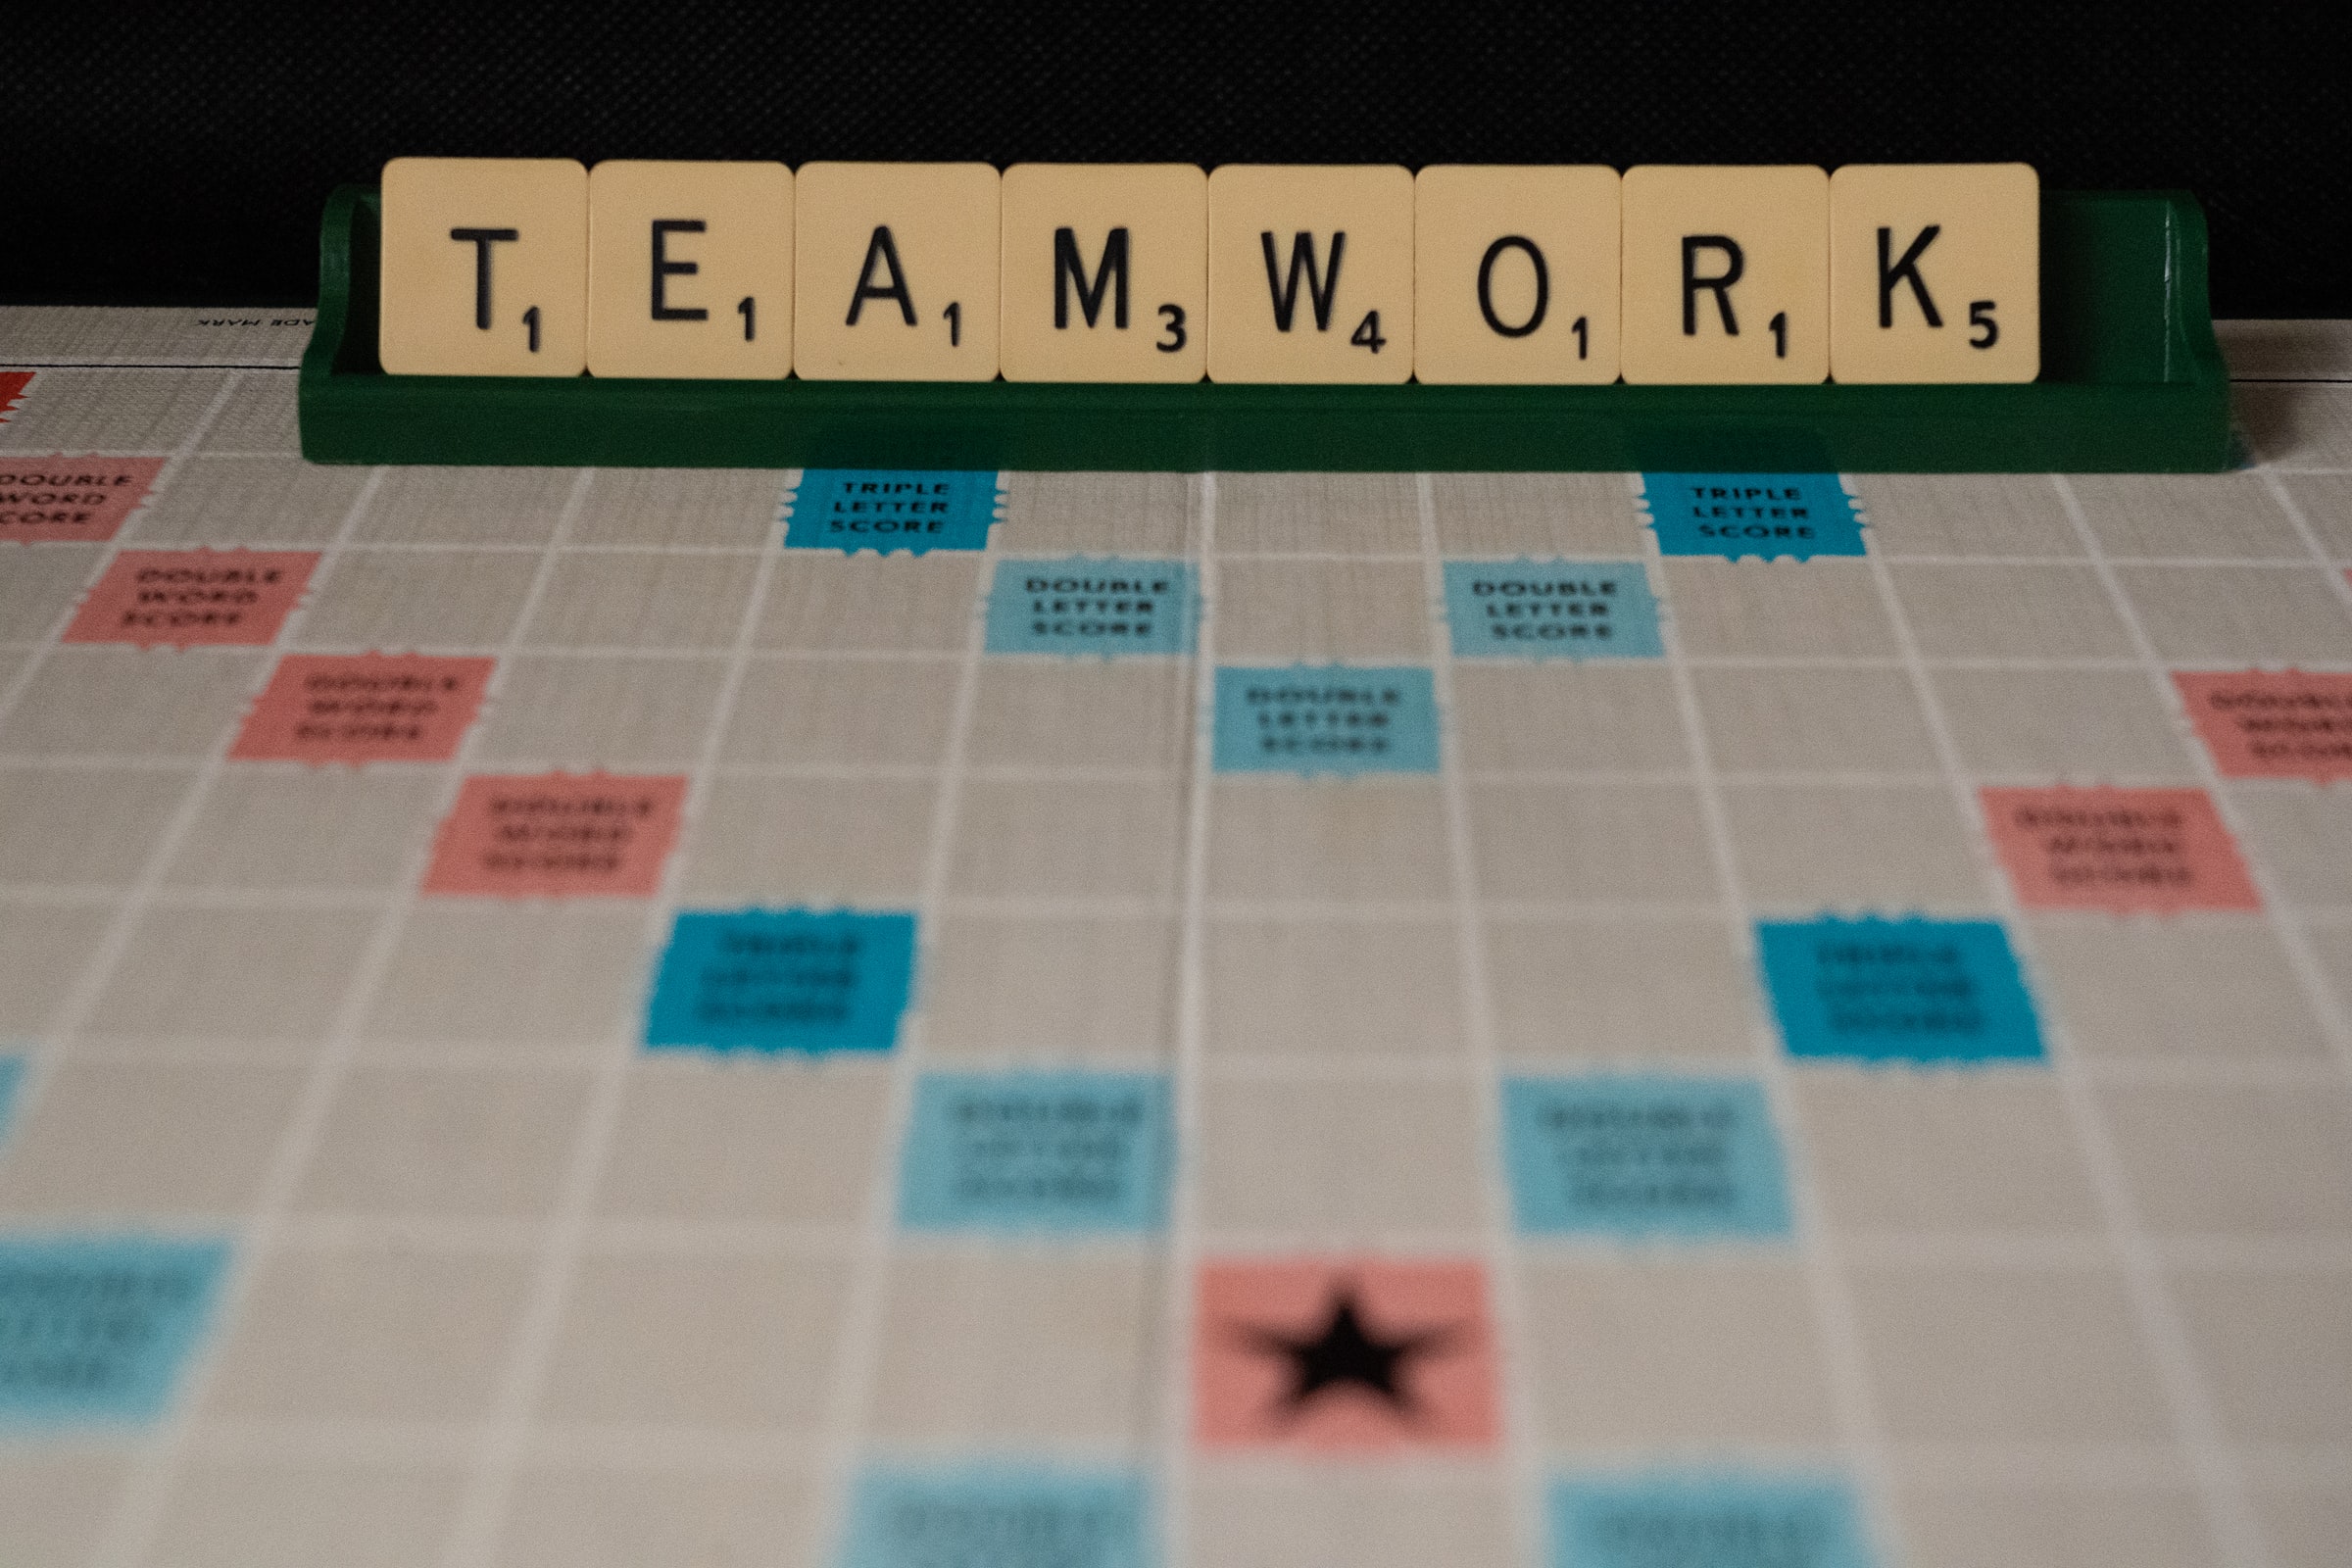 Scrable board that spells TEAMWORK for smoothly updating supplier specifications